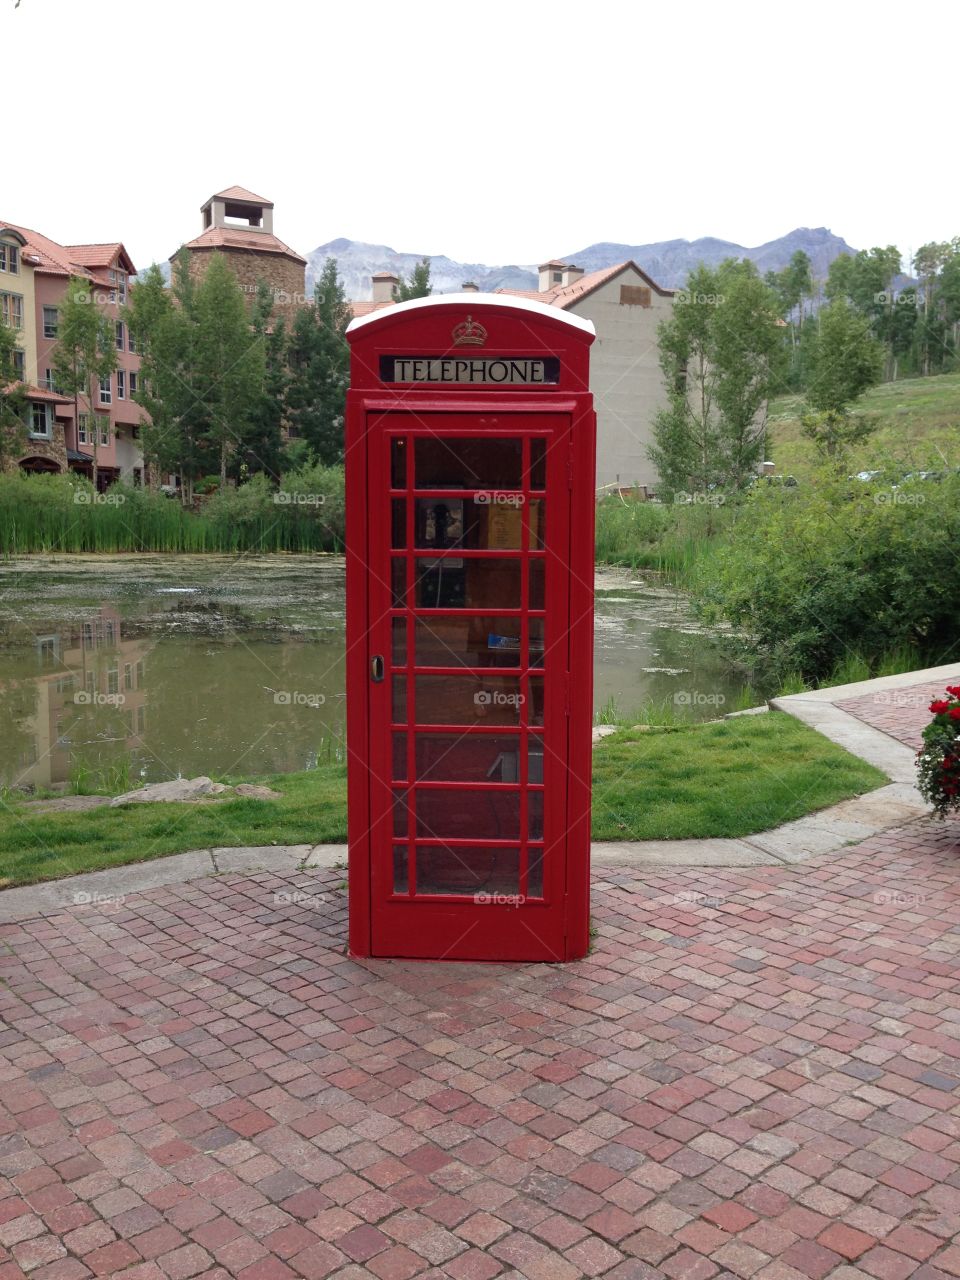 Phone booth. Phone booth